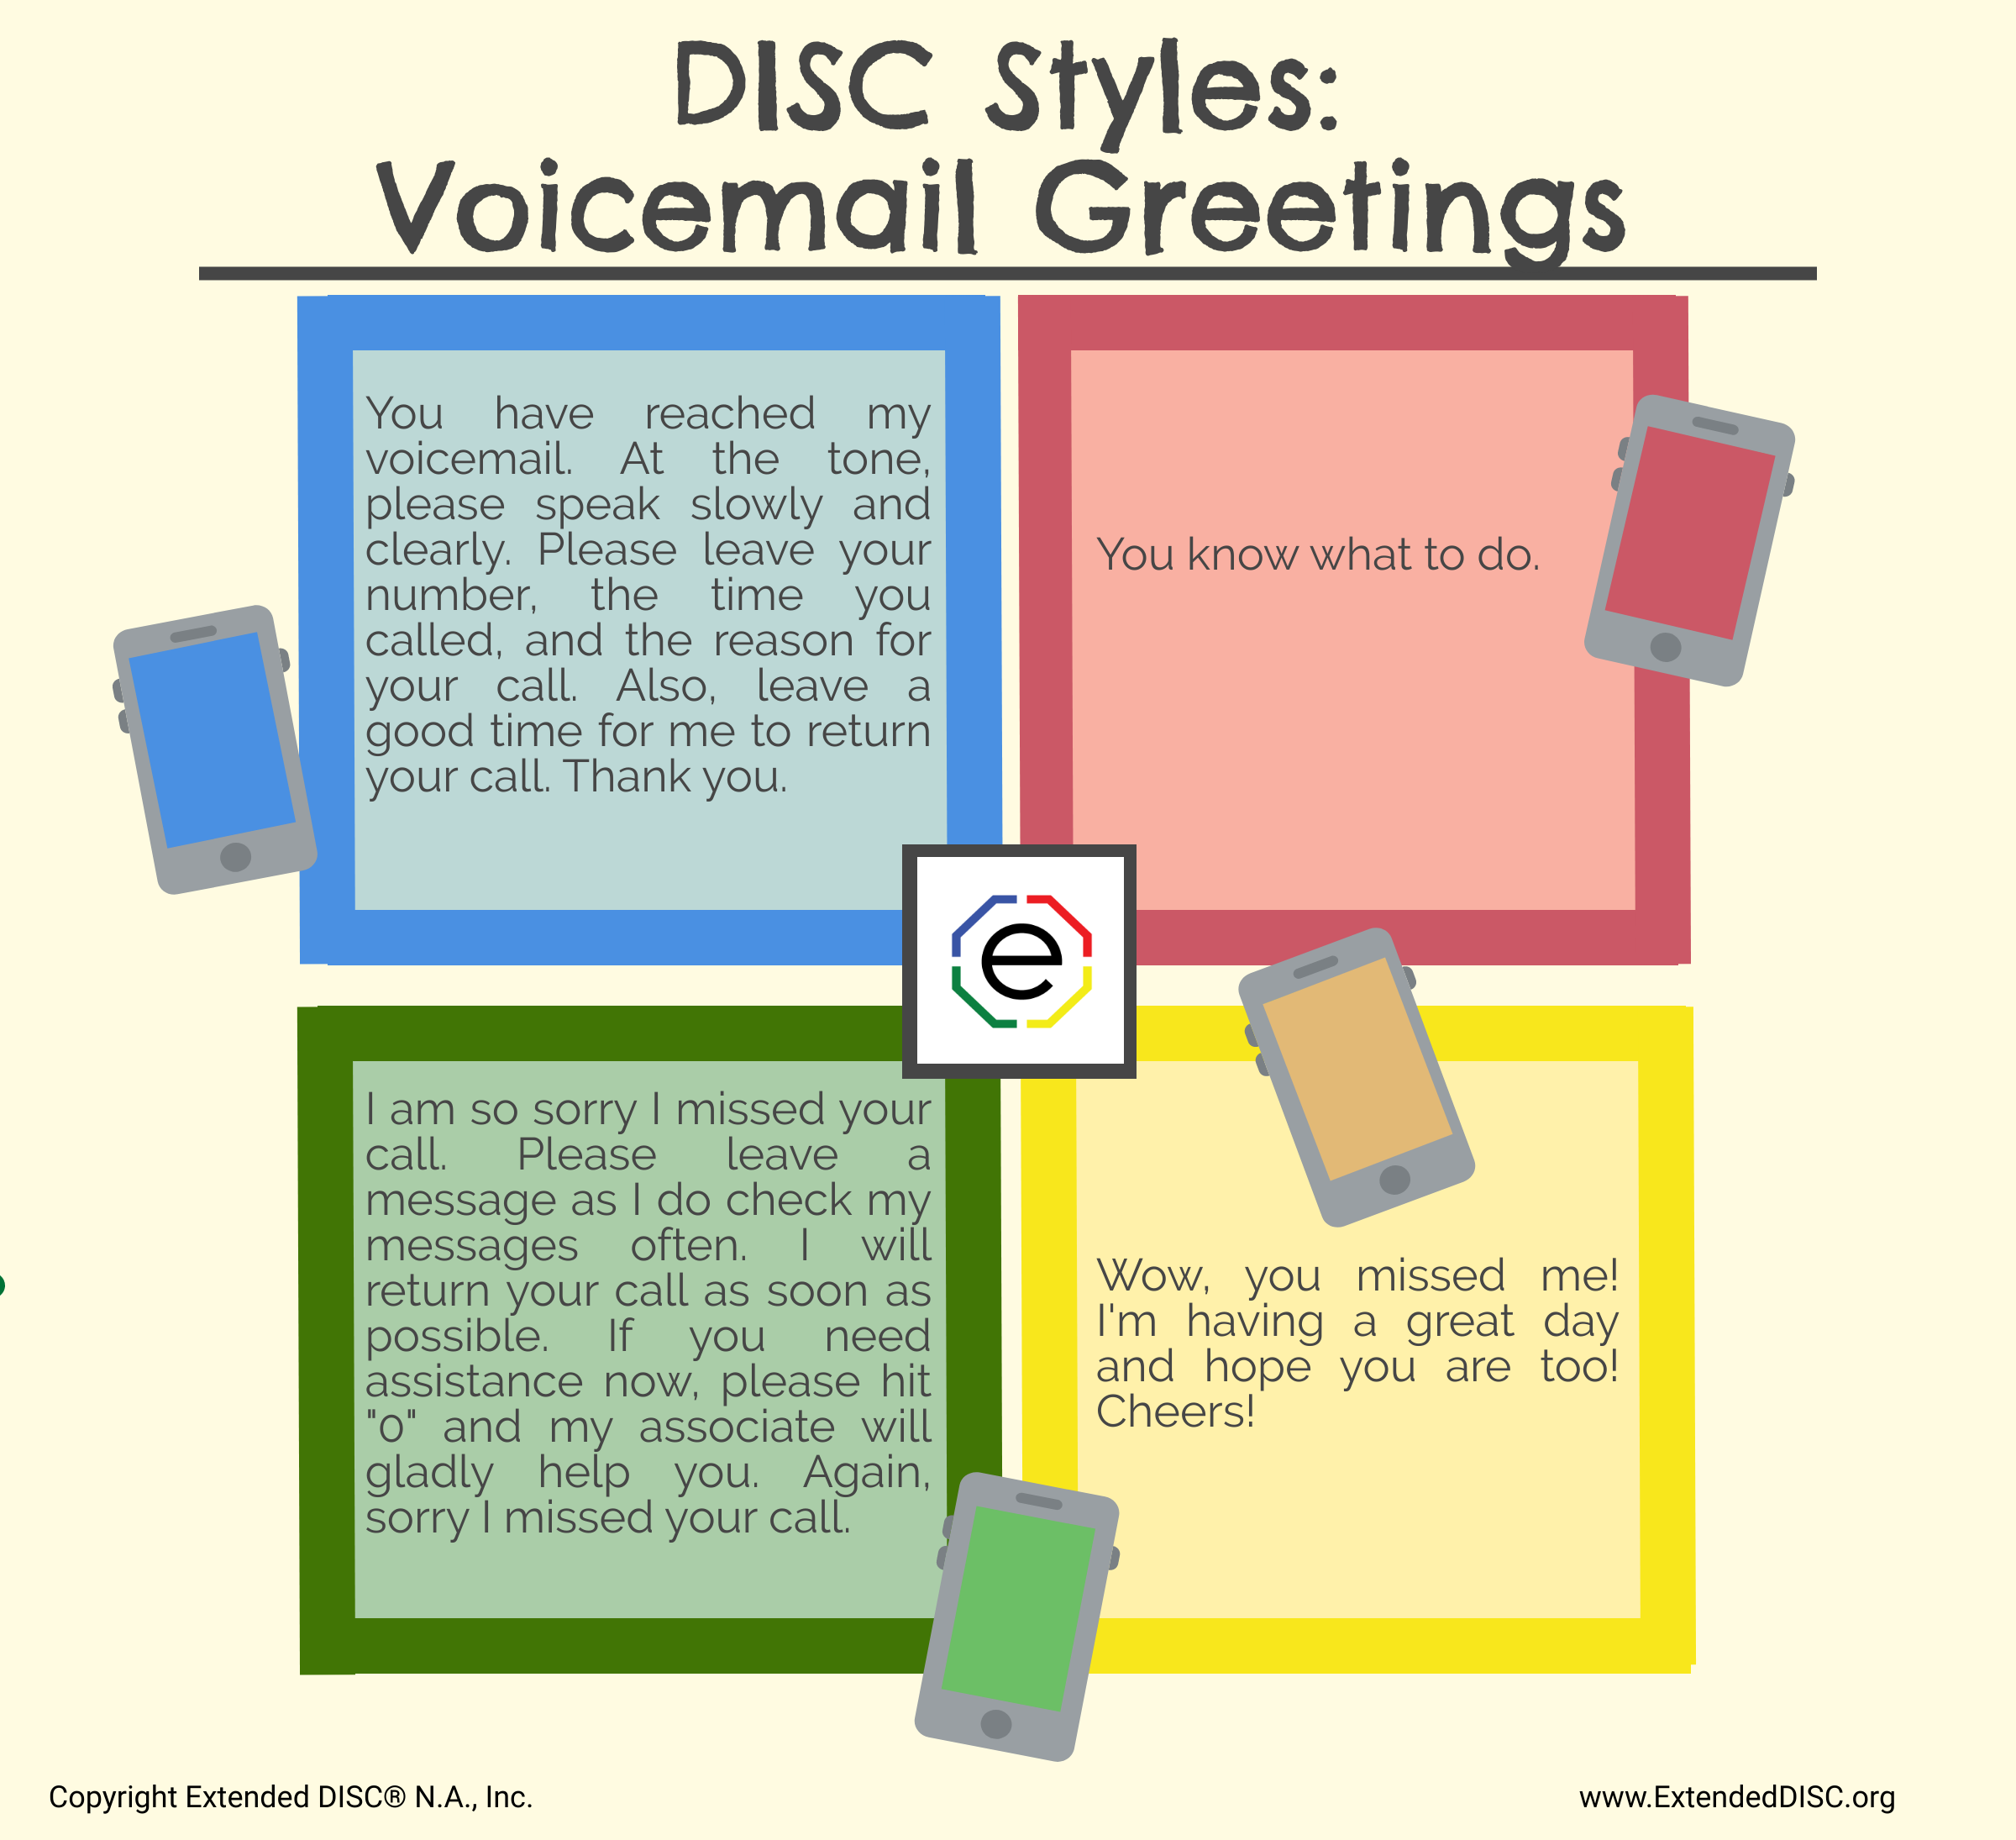 DISC Styles and Voicemail Greetings